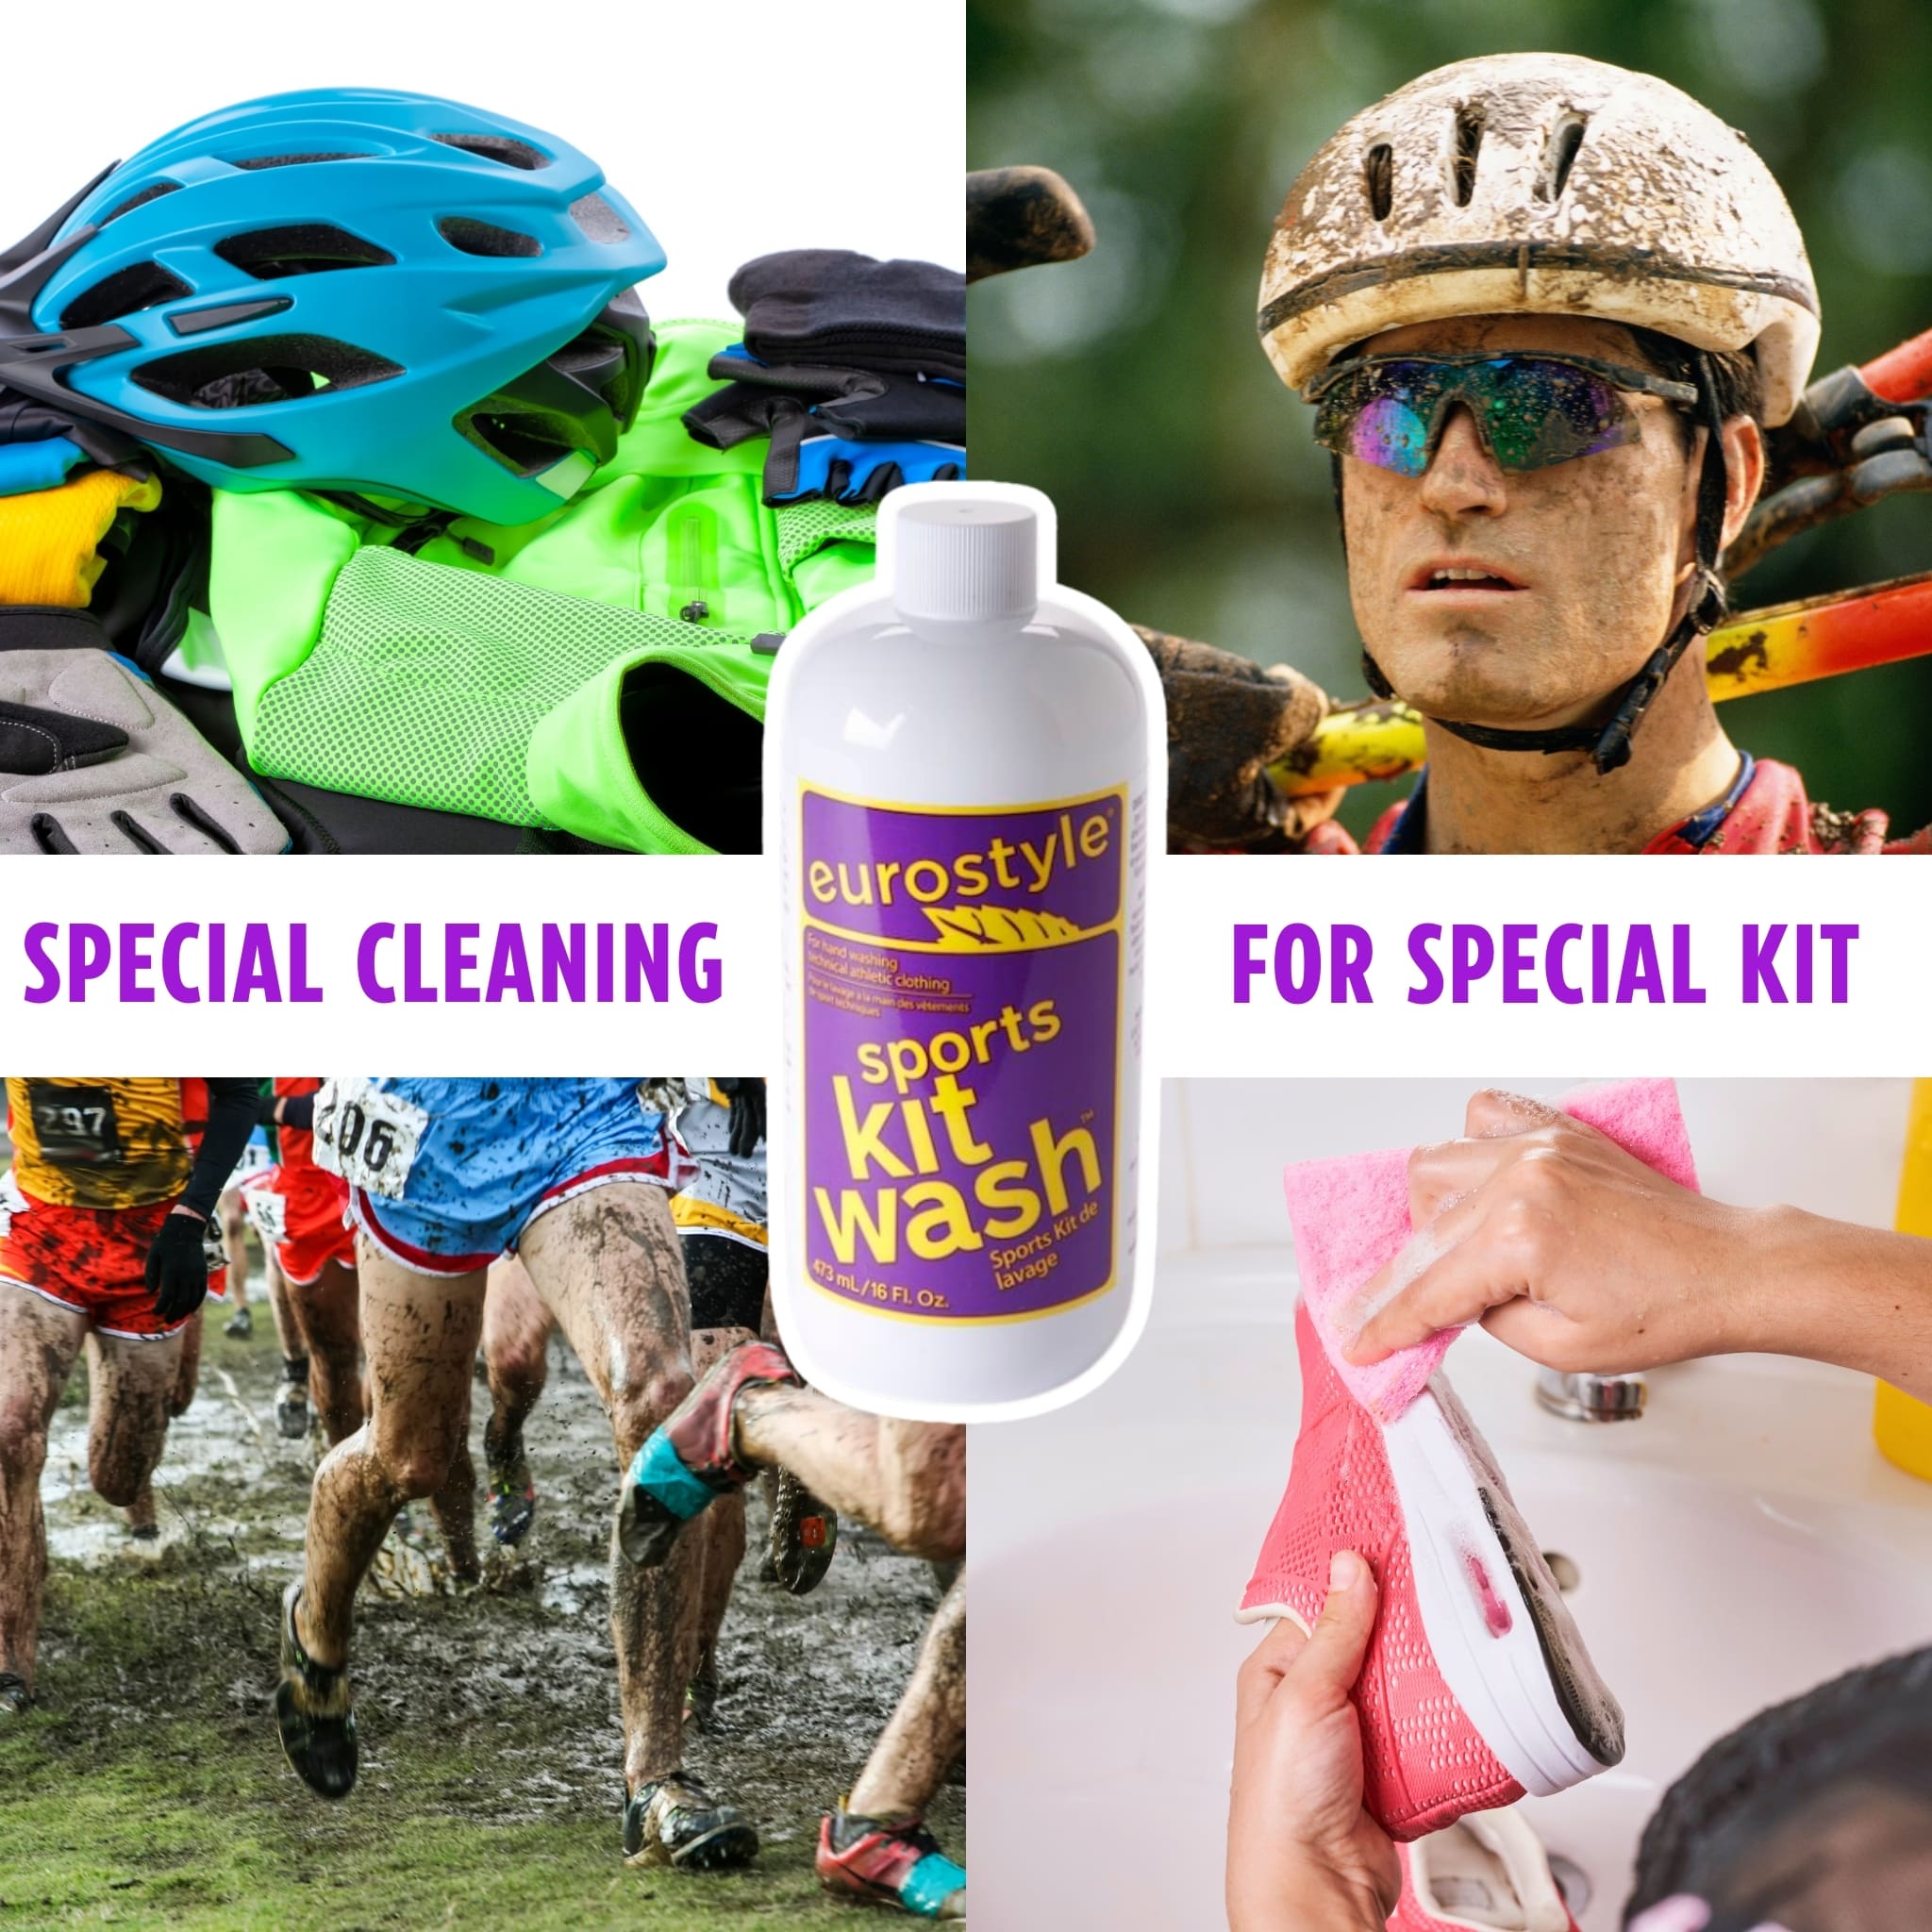 Eurostyle Sports Kit Wash (473ml) - Special cleaning for special kit